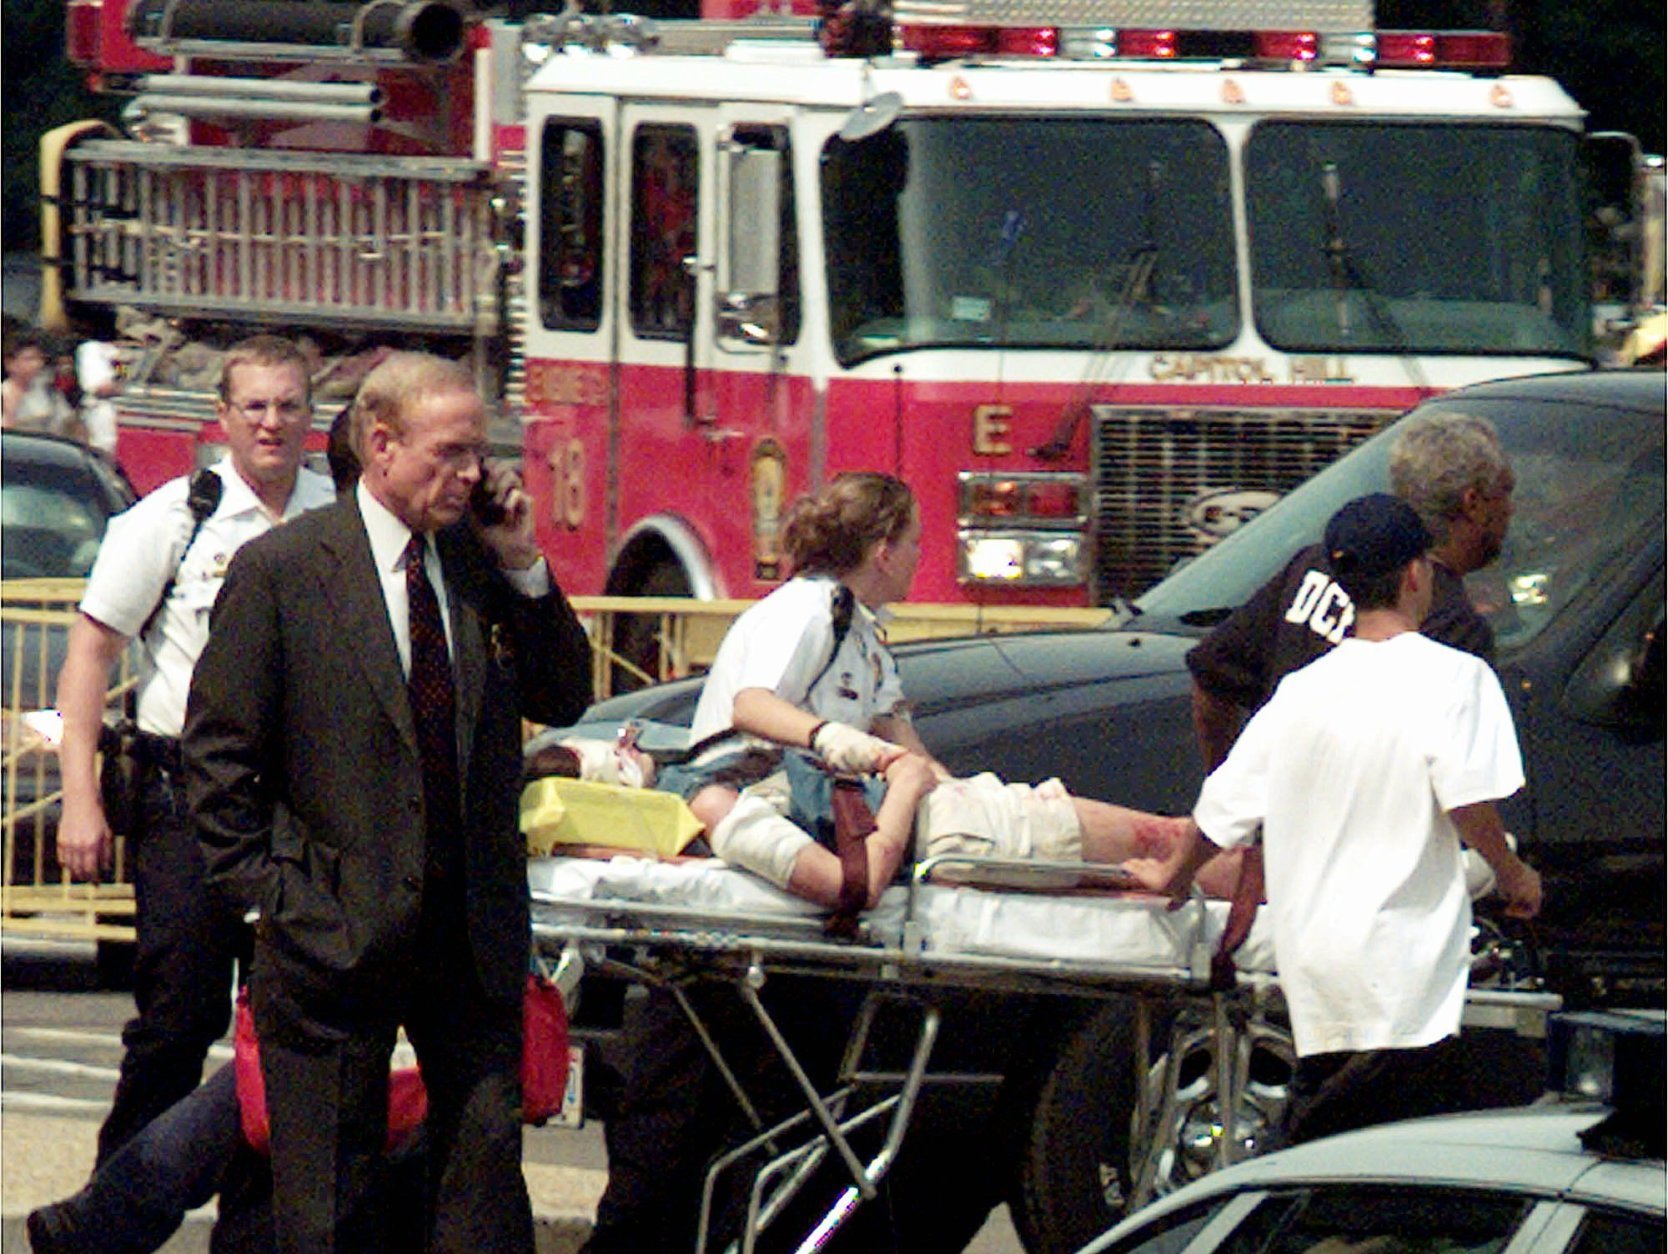 An unidentified victim is rushed to a helicopter on Capitol Hill Friday, July 24, 1998  in Washington. Two policemen, a female tourist and a suspected gunman were wounded late Friday afternoon in an exchange of gunfire inside the Capitol at the office of Rep. Tom DeLay, R-Texas, officials said.  The shootings on the first floor of the Capitol building occurred about 3:40 p.m. EDT, with the House in session and the Senate just finished for the day. The historic white-domed building was filled with tourists. (AP Photo/Joe Marquette)